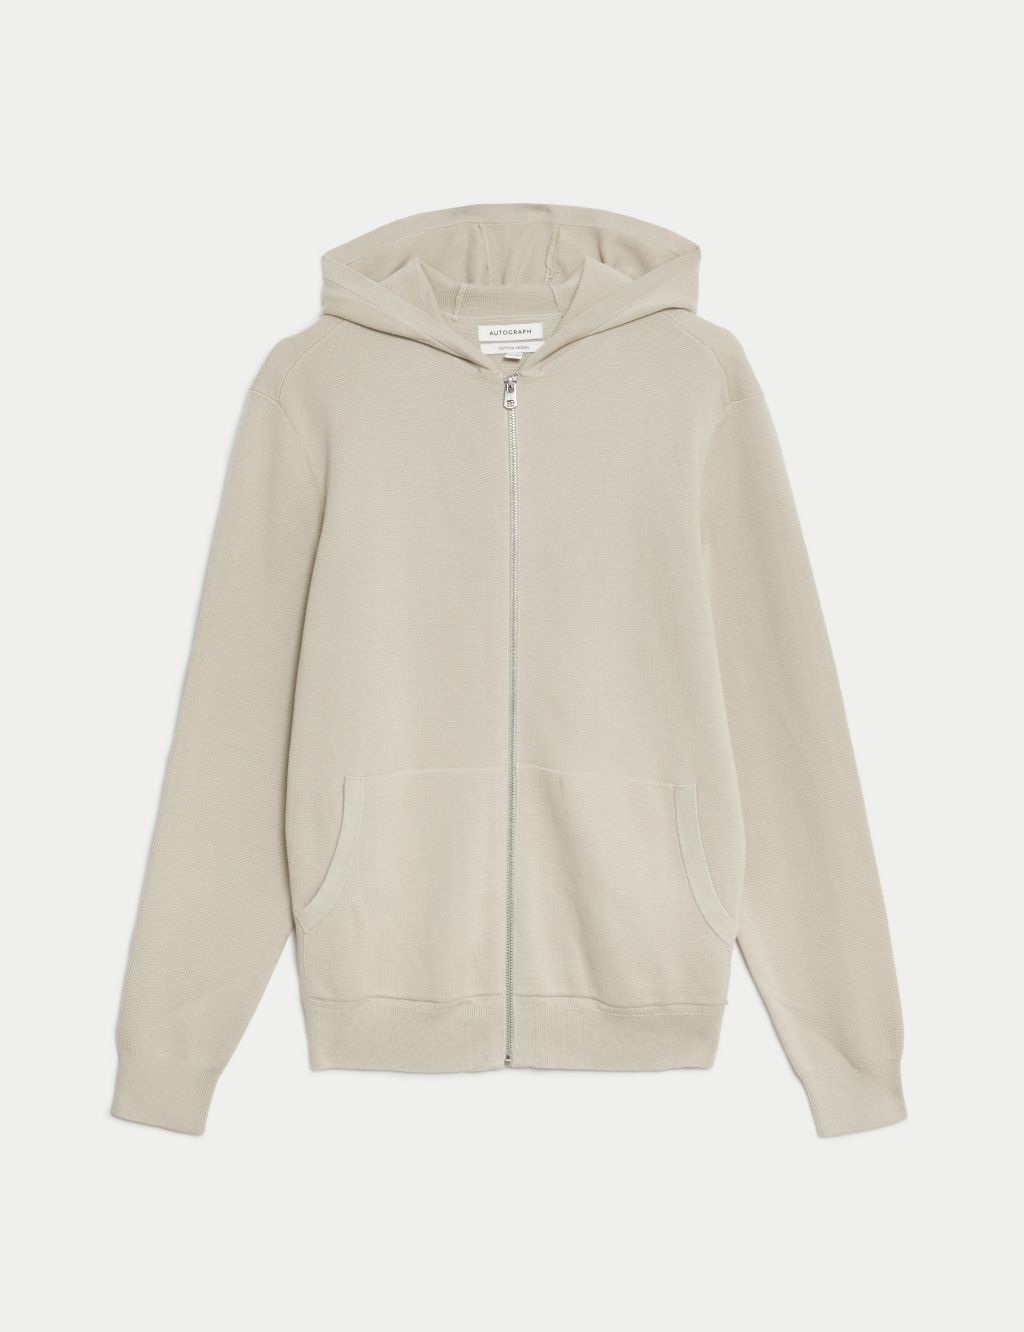 Cotton Rich Zip Up Knitted Hoodie image 2